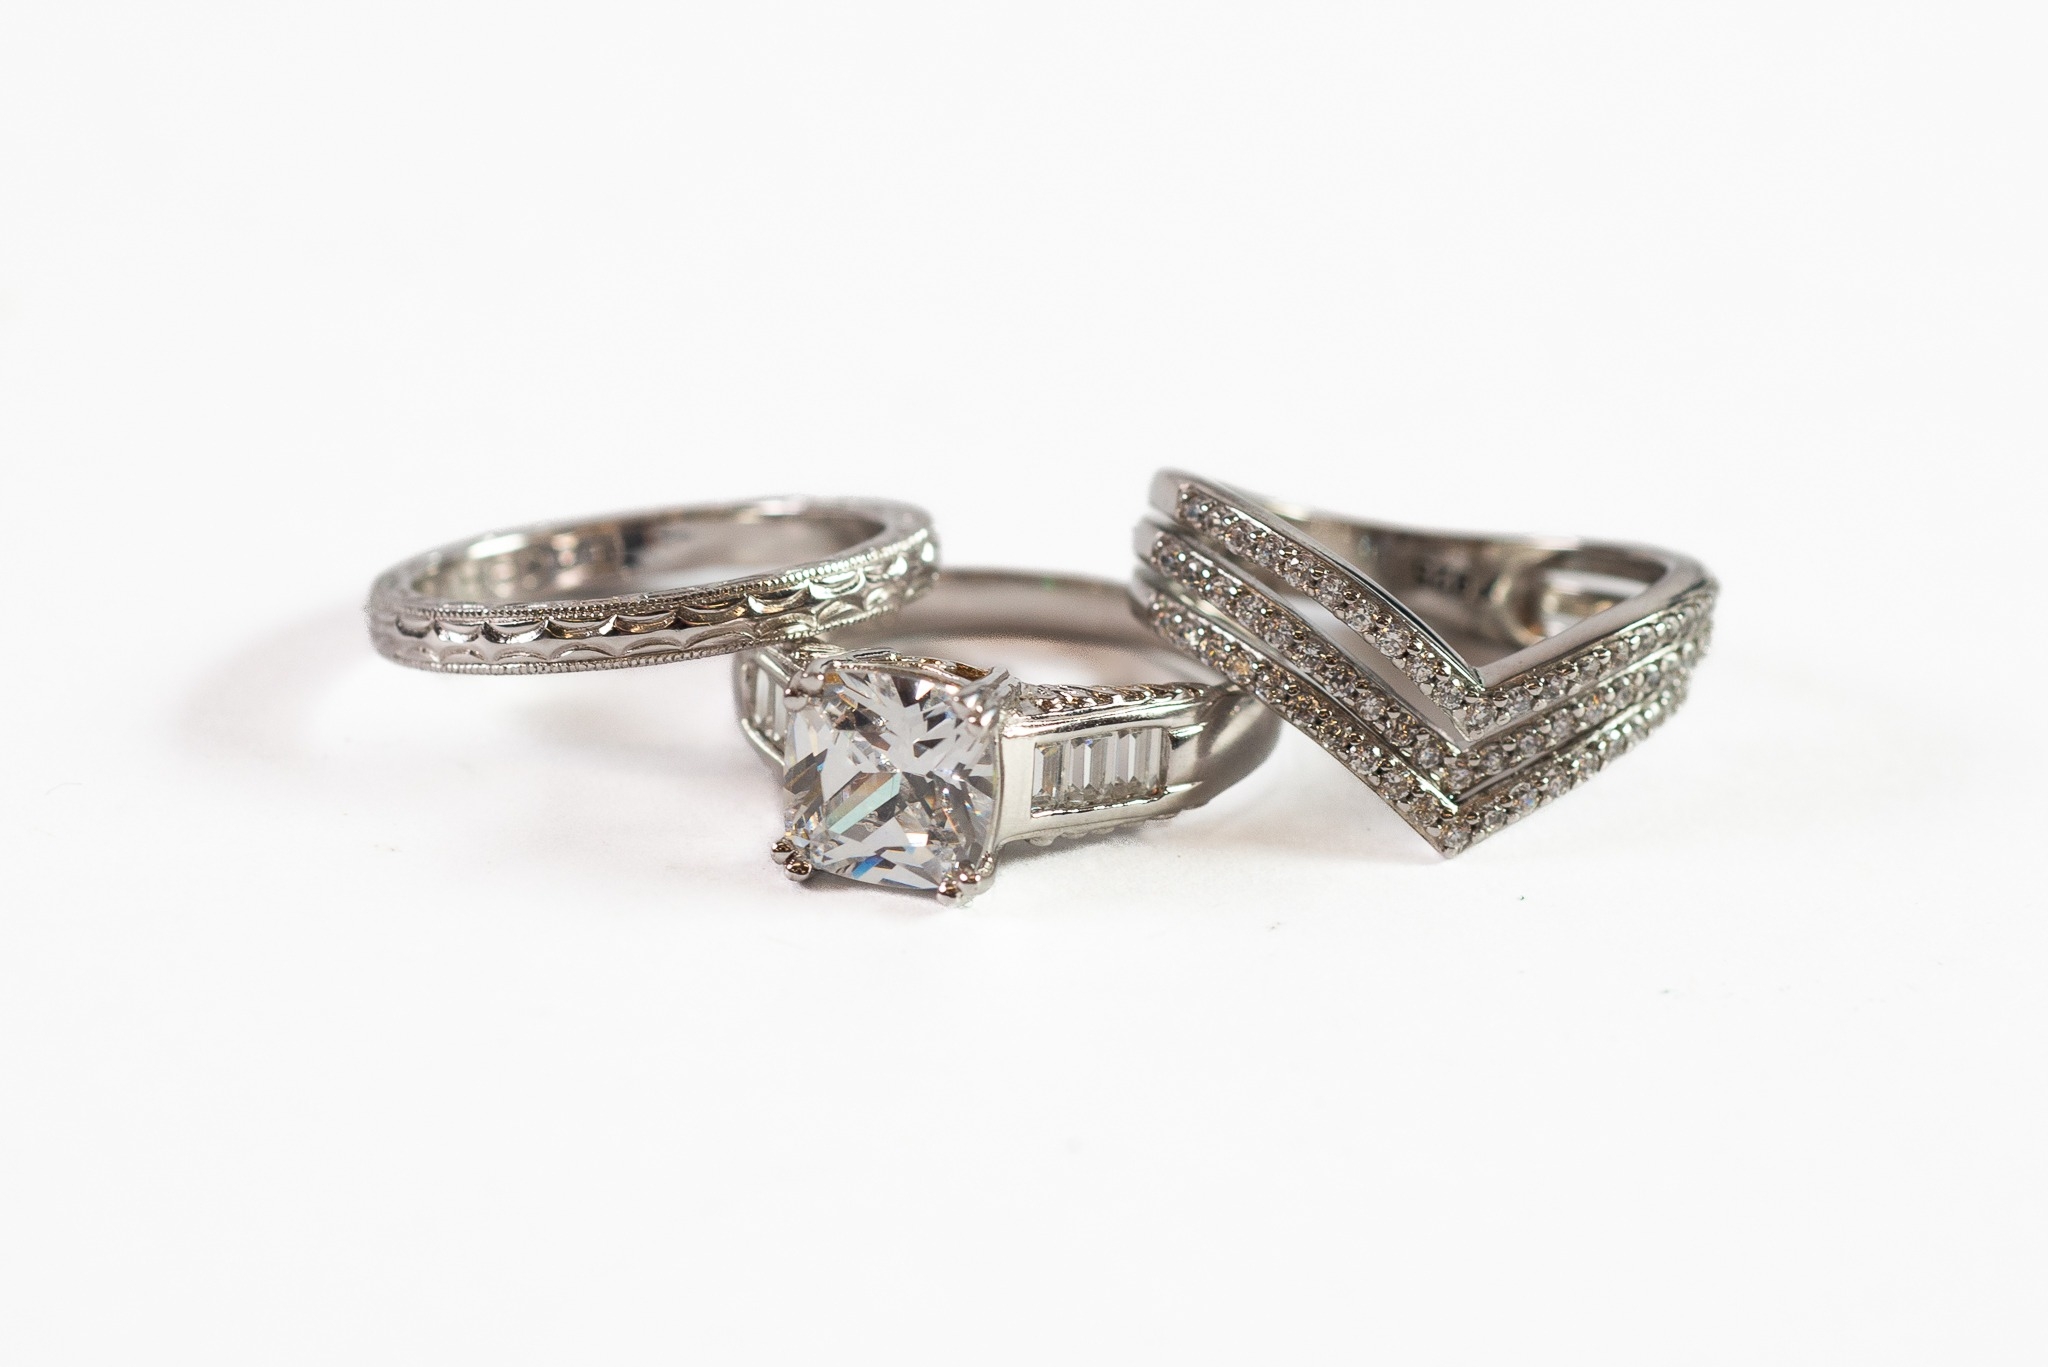 SILVER RING, set with a princess cut CZ stone and baguette stones to the shoulders and TWO OTHER